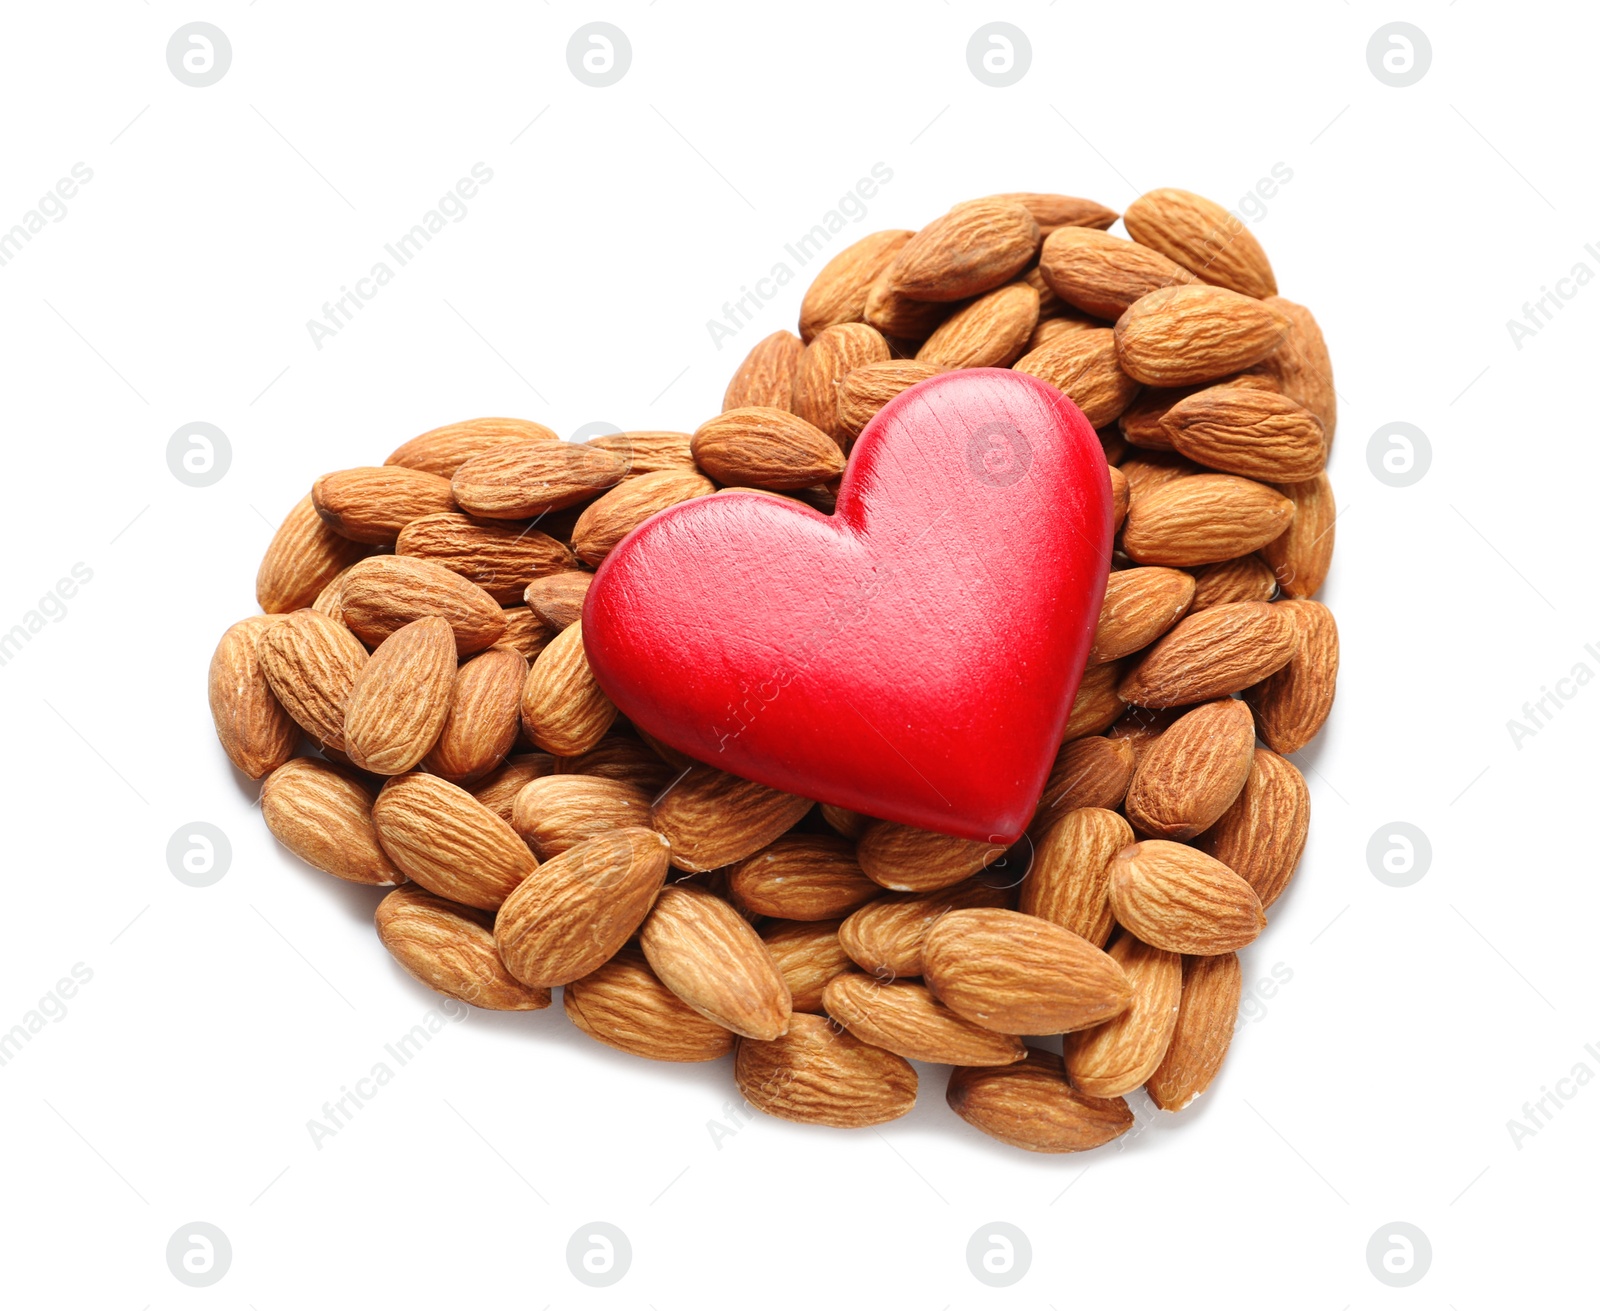 Photo of Heart made of almonds and decor on white background. Healthy diet